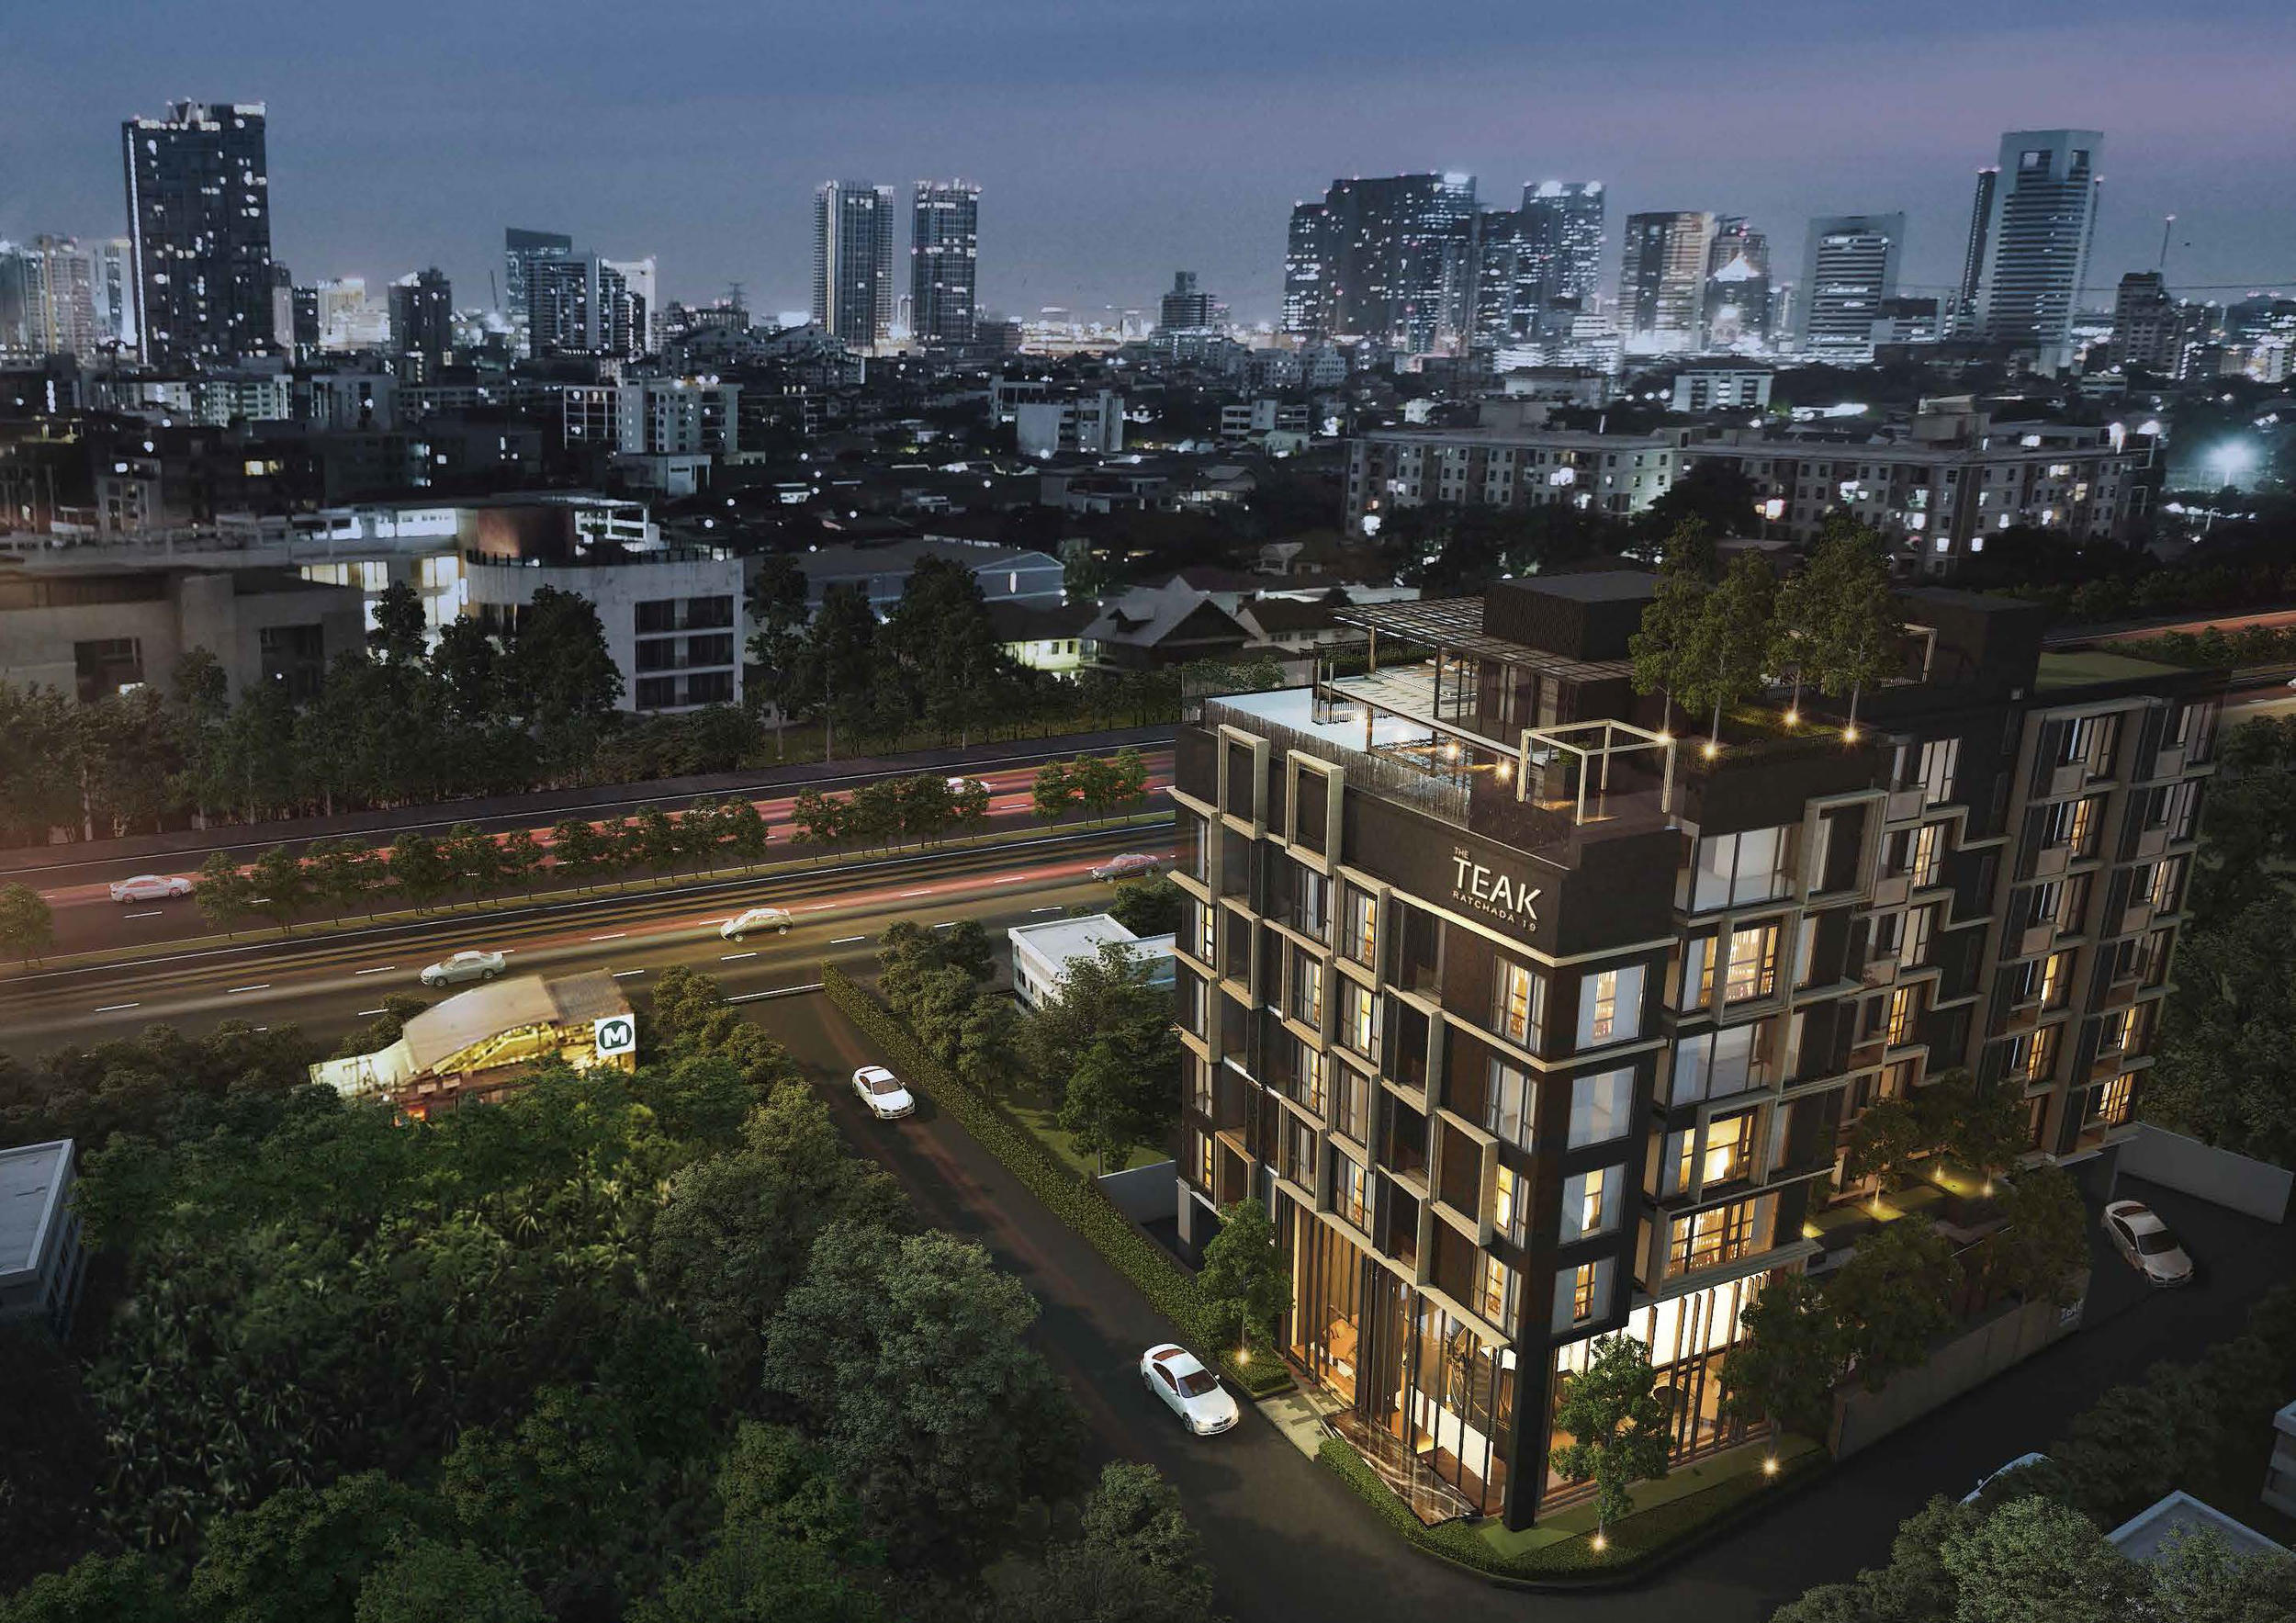 The Teak Ratchada 19 by The Teak Development. Next to Ratchada MRT. The Teak Ratchada 19 is a freehold condominium that will be completed in end 2021.